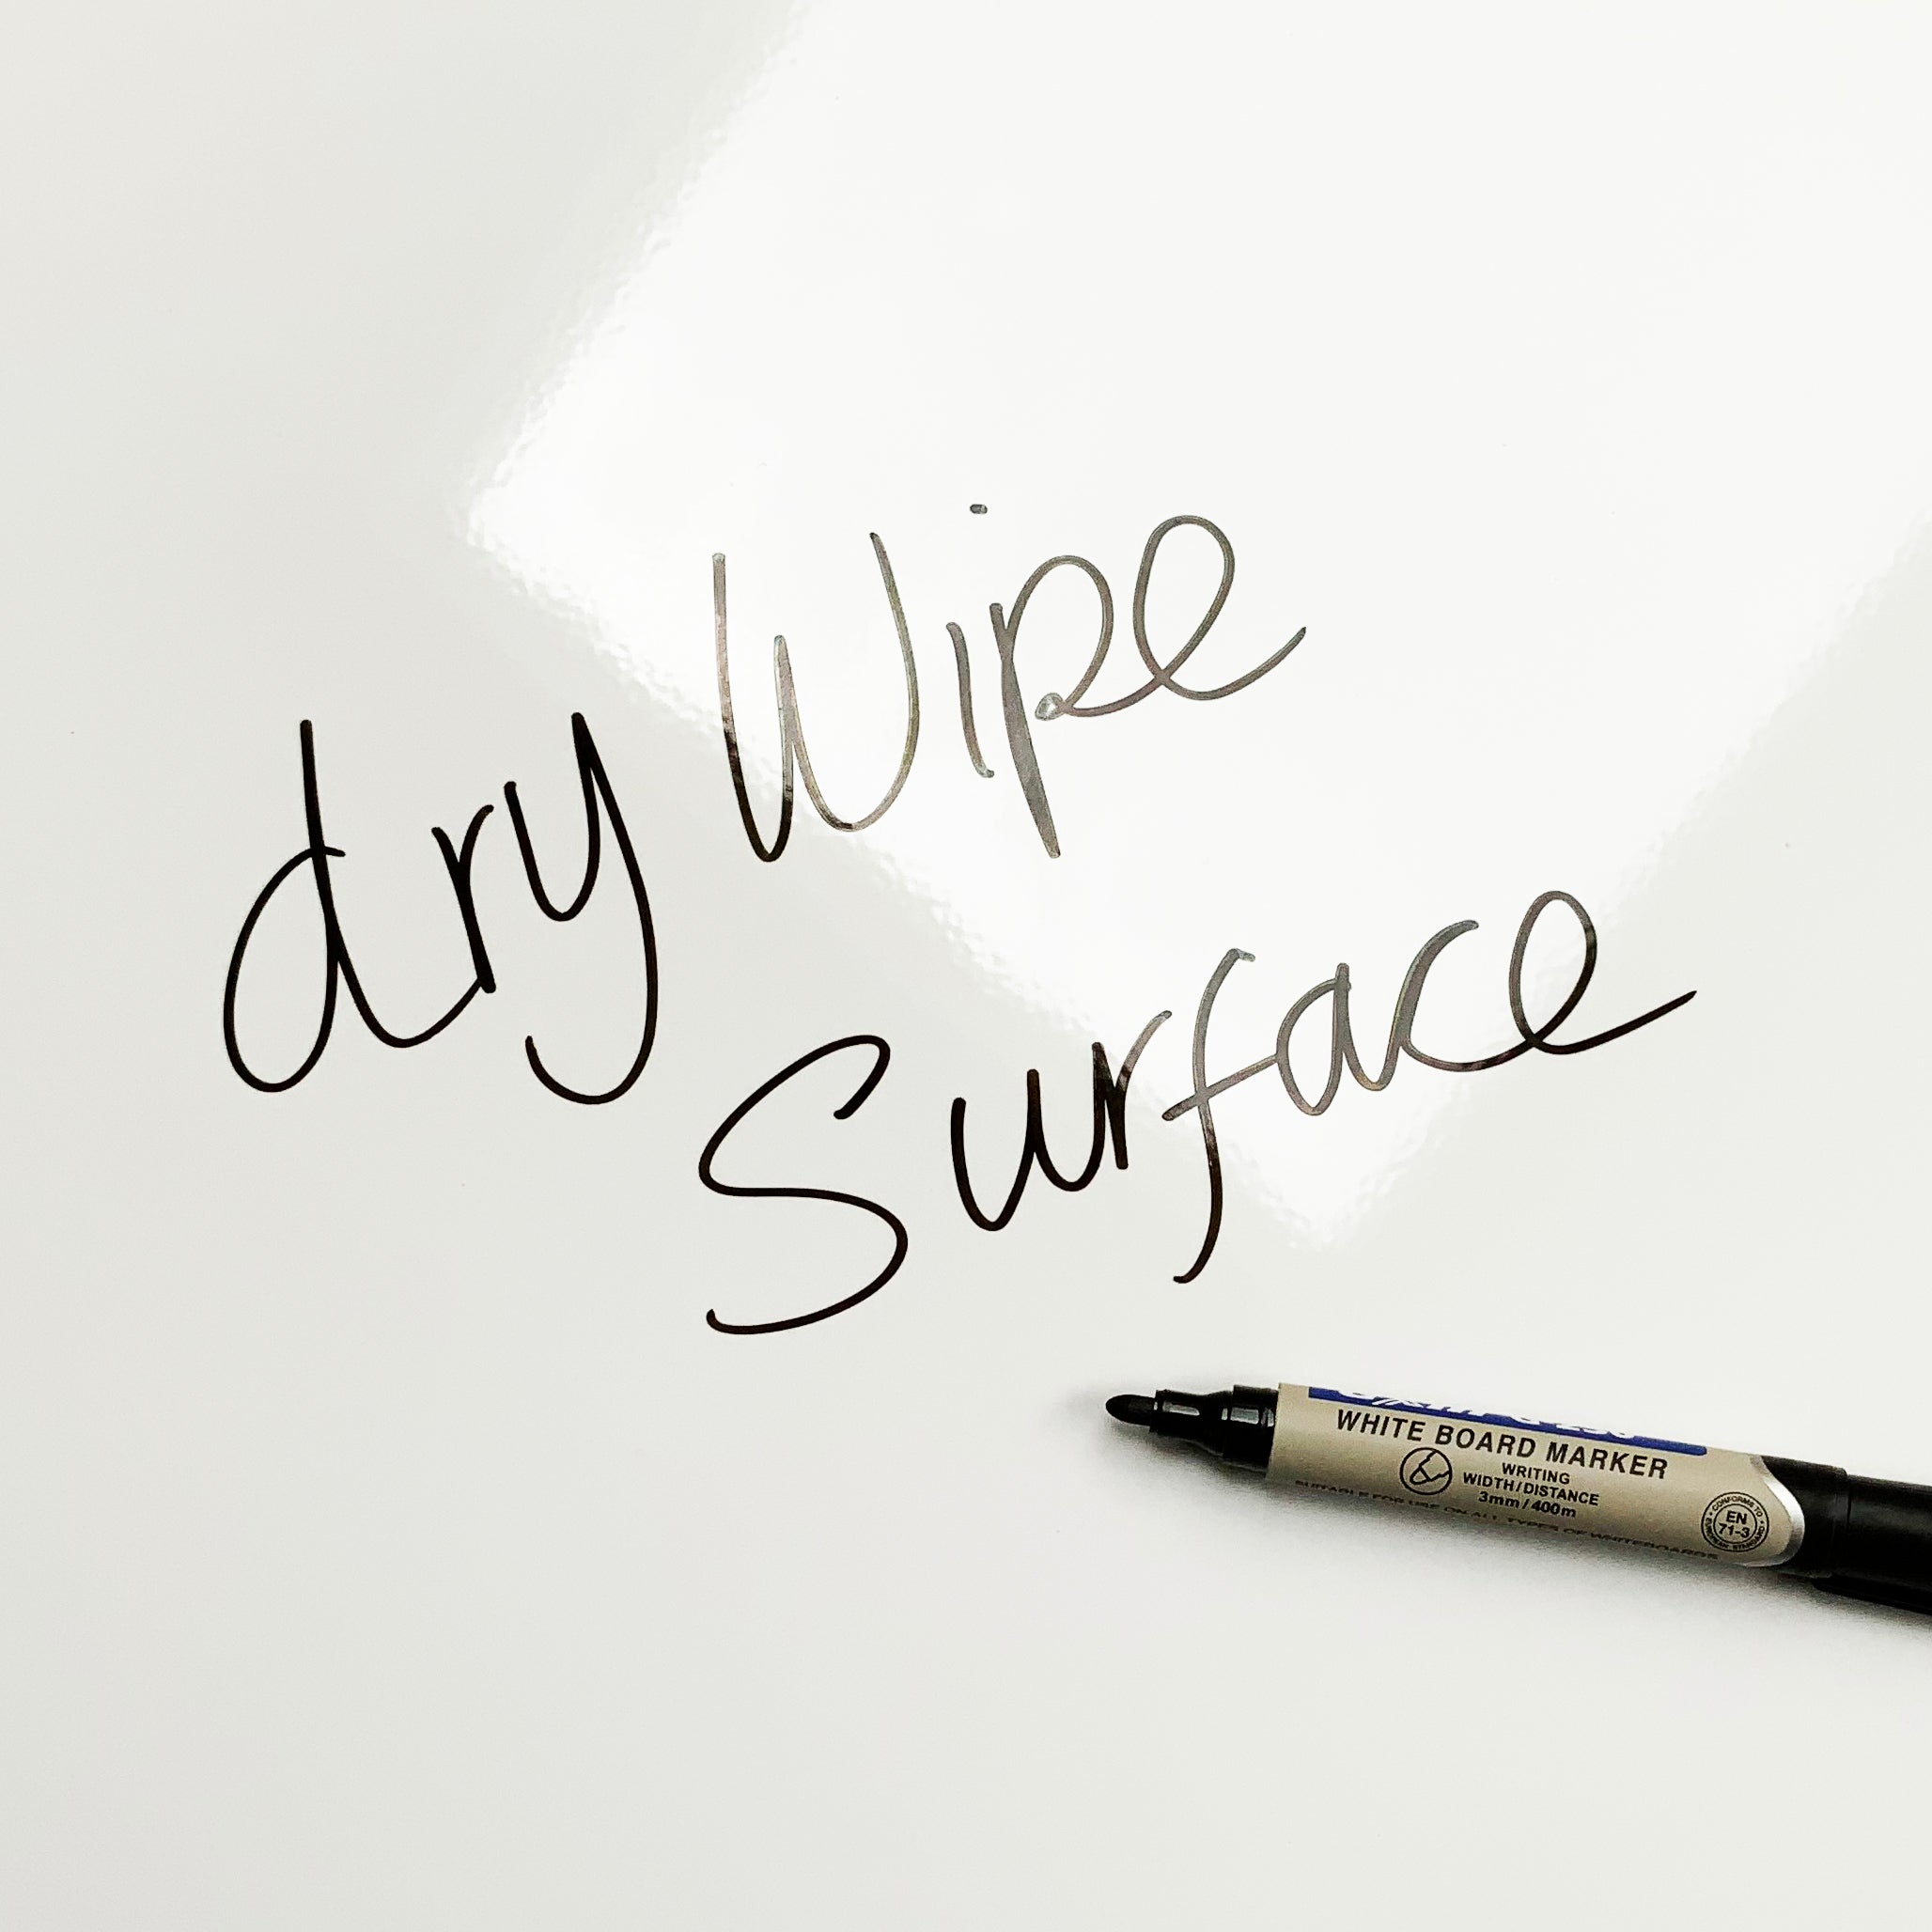 A plain white magnetic board with dry wipe surface written on it with a whiteboard marker pen